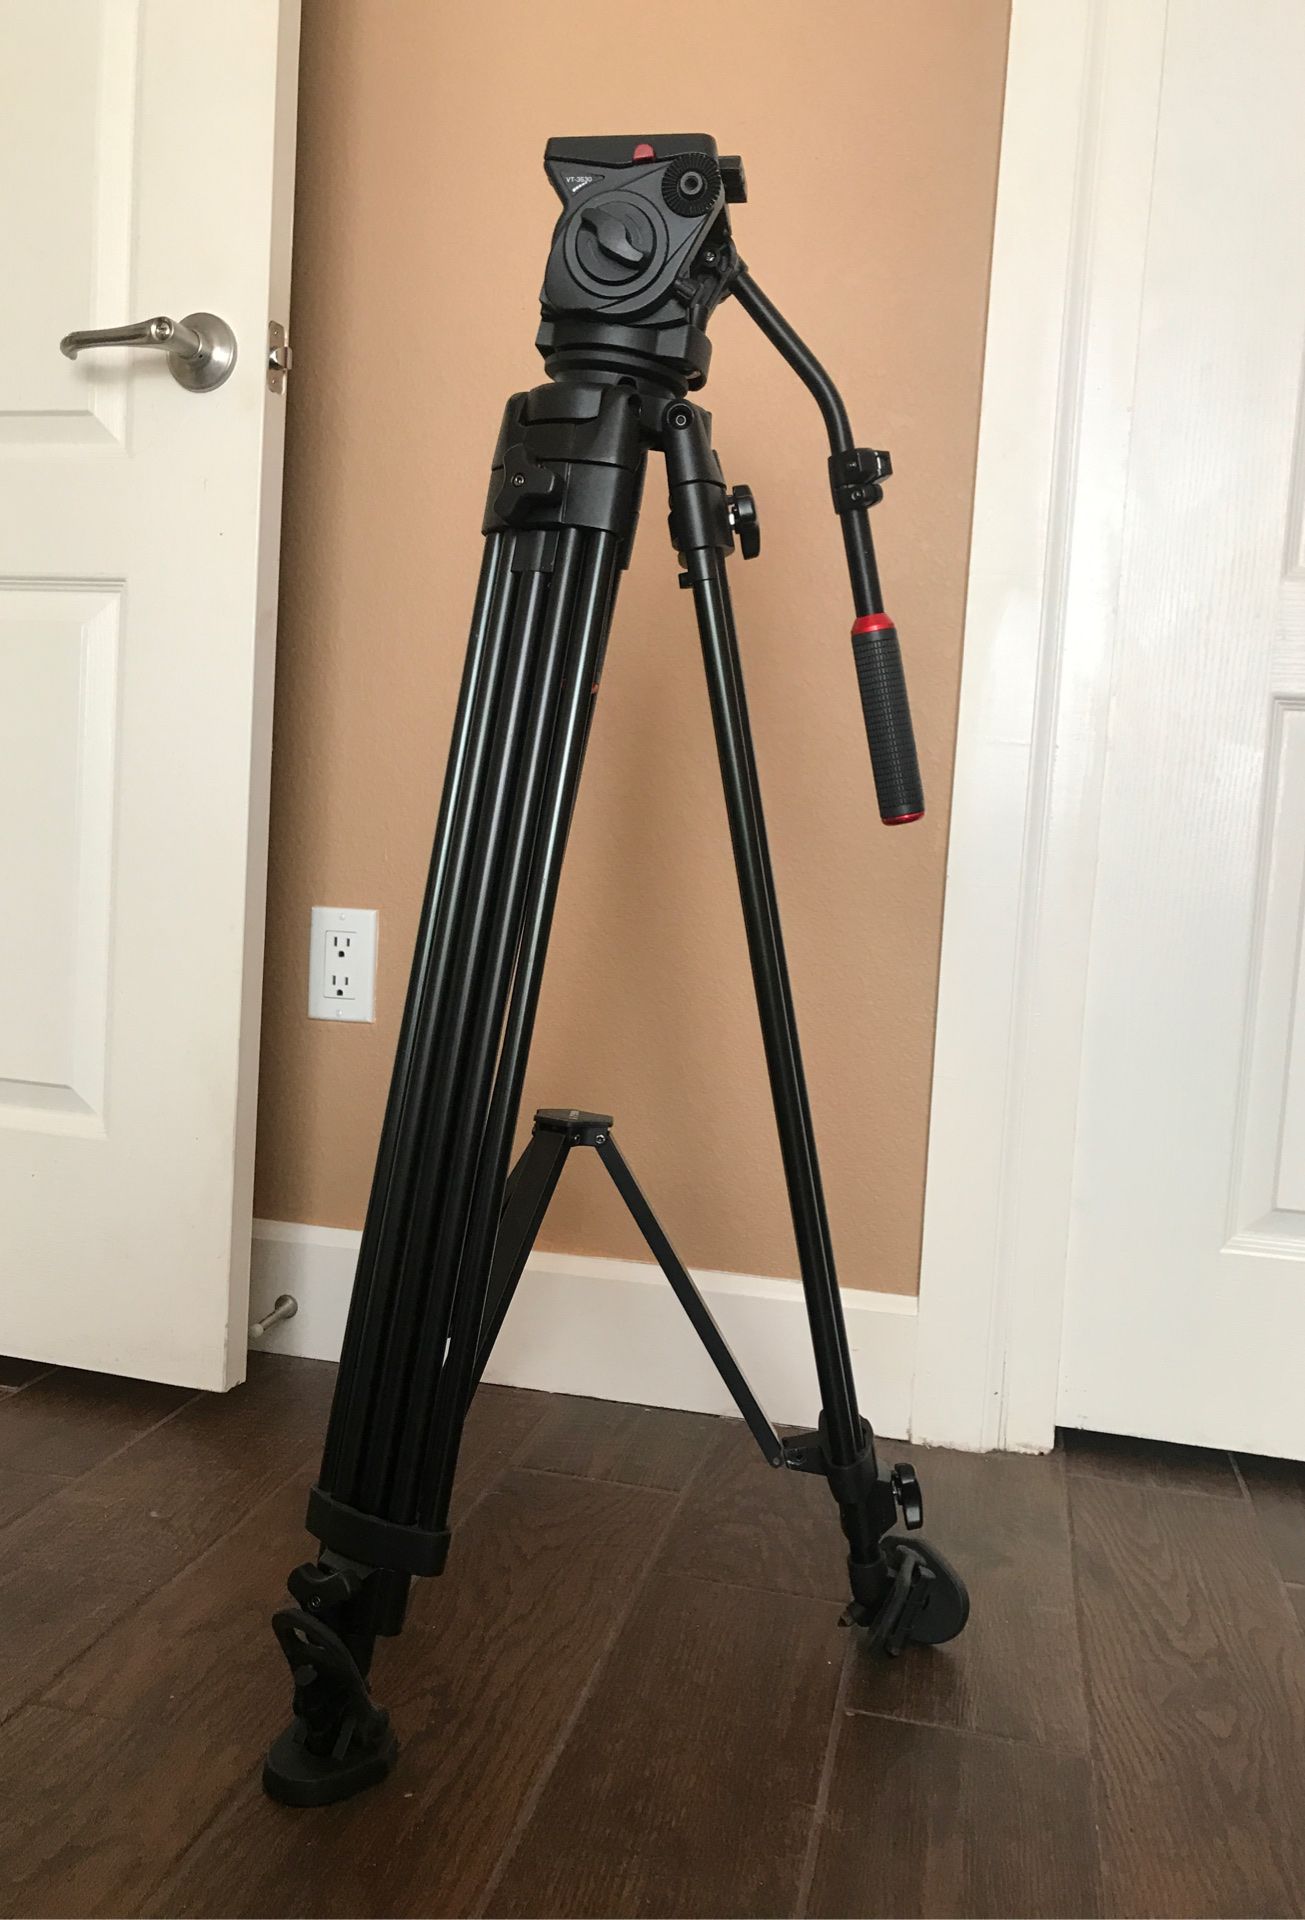 Professional tripod with ball head and extending legs